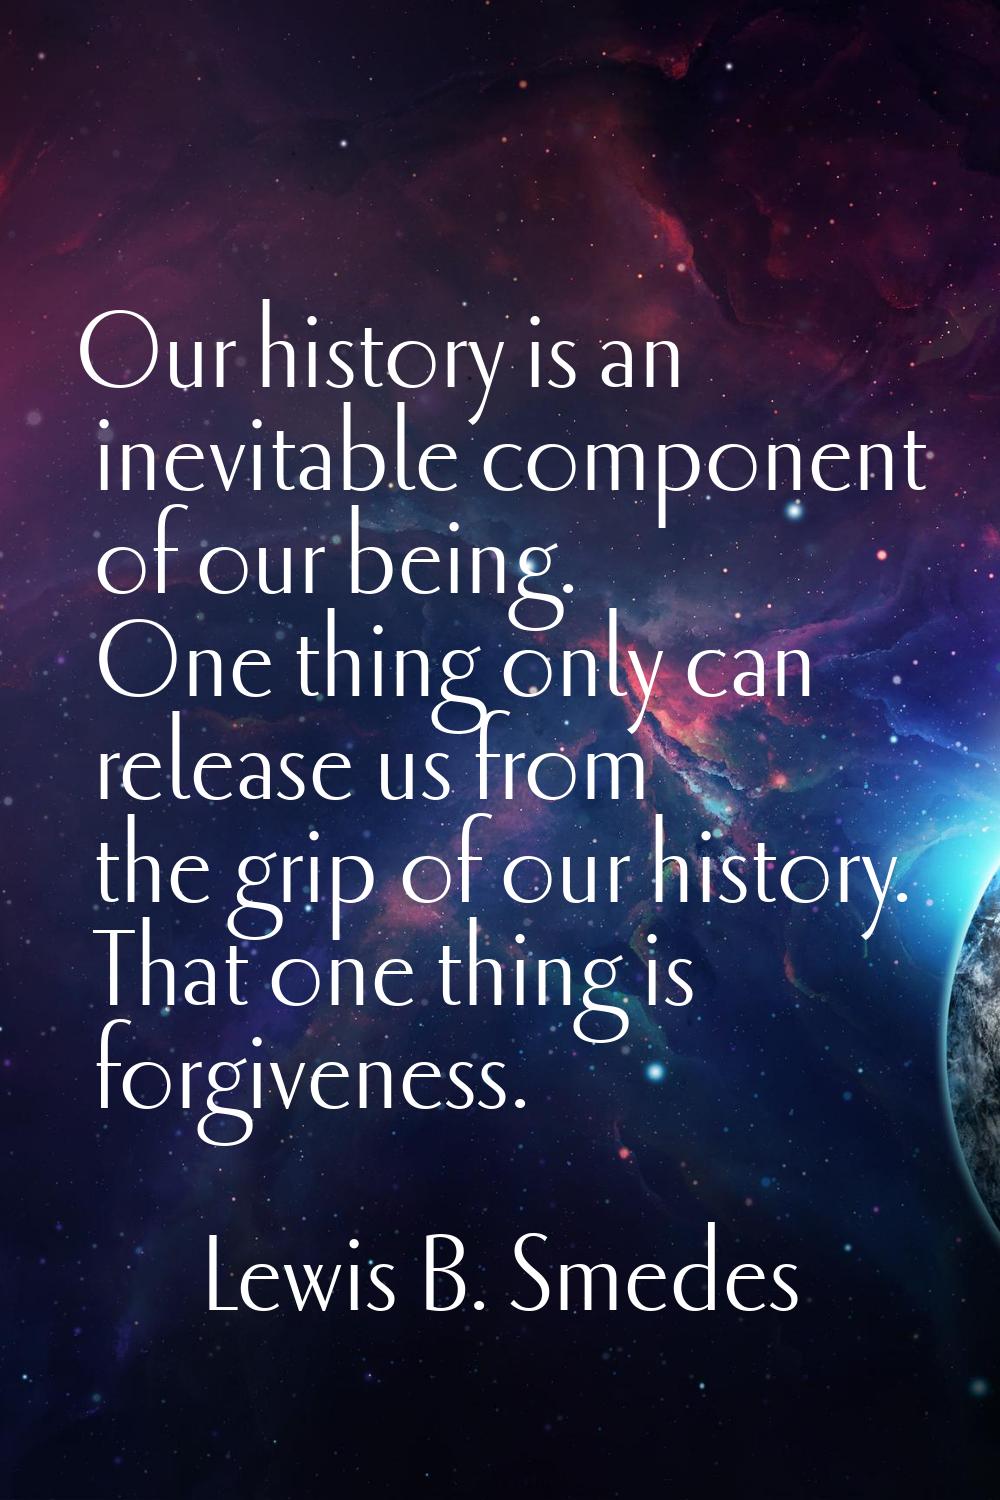 Our history is an inevitable component of our being. One thing only can release us from the grip of